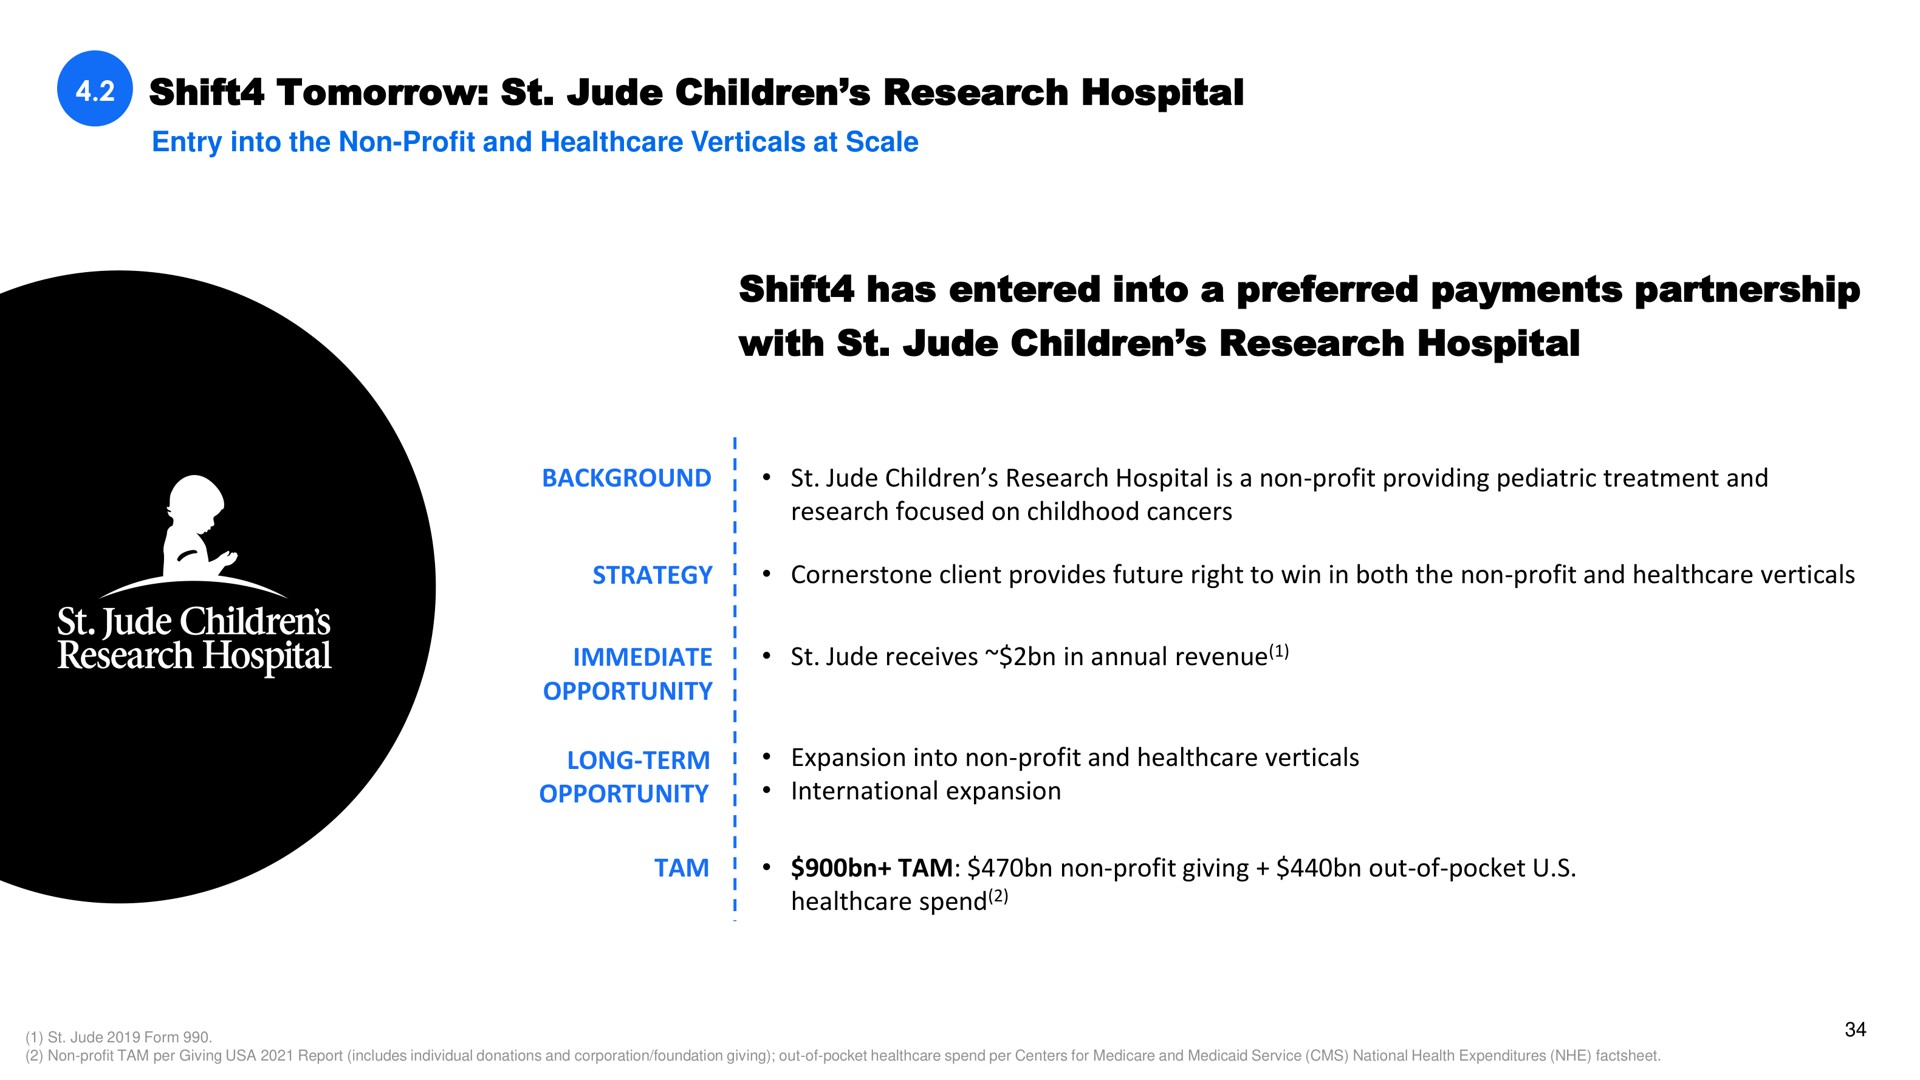 shift tomorrow children research hospital entry into the non profit and verticals at scale shift has entered into a preferred payments partnership with children research hospital background children research hospital is a non profit providing pediatric treatment and research focused on childhood cancers strategy cornerstone client provides future right to win in both the non profit and verticals immediate opportunity receives in annual revenue long term opportunity expansion into non profit and verticals international expansion tam tam non profit giving out of pocket spend i | Shift4